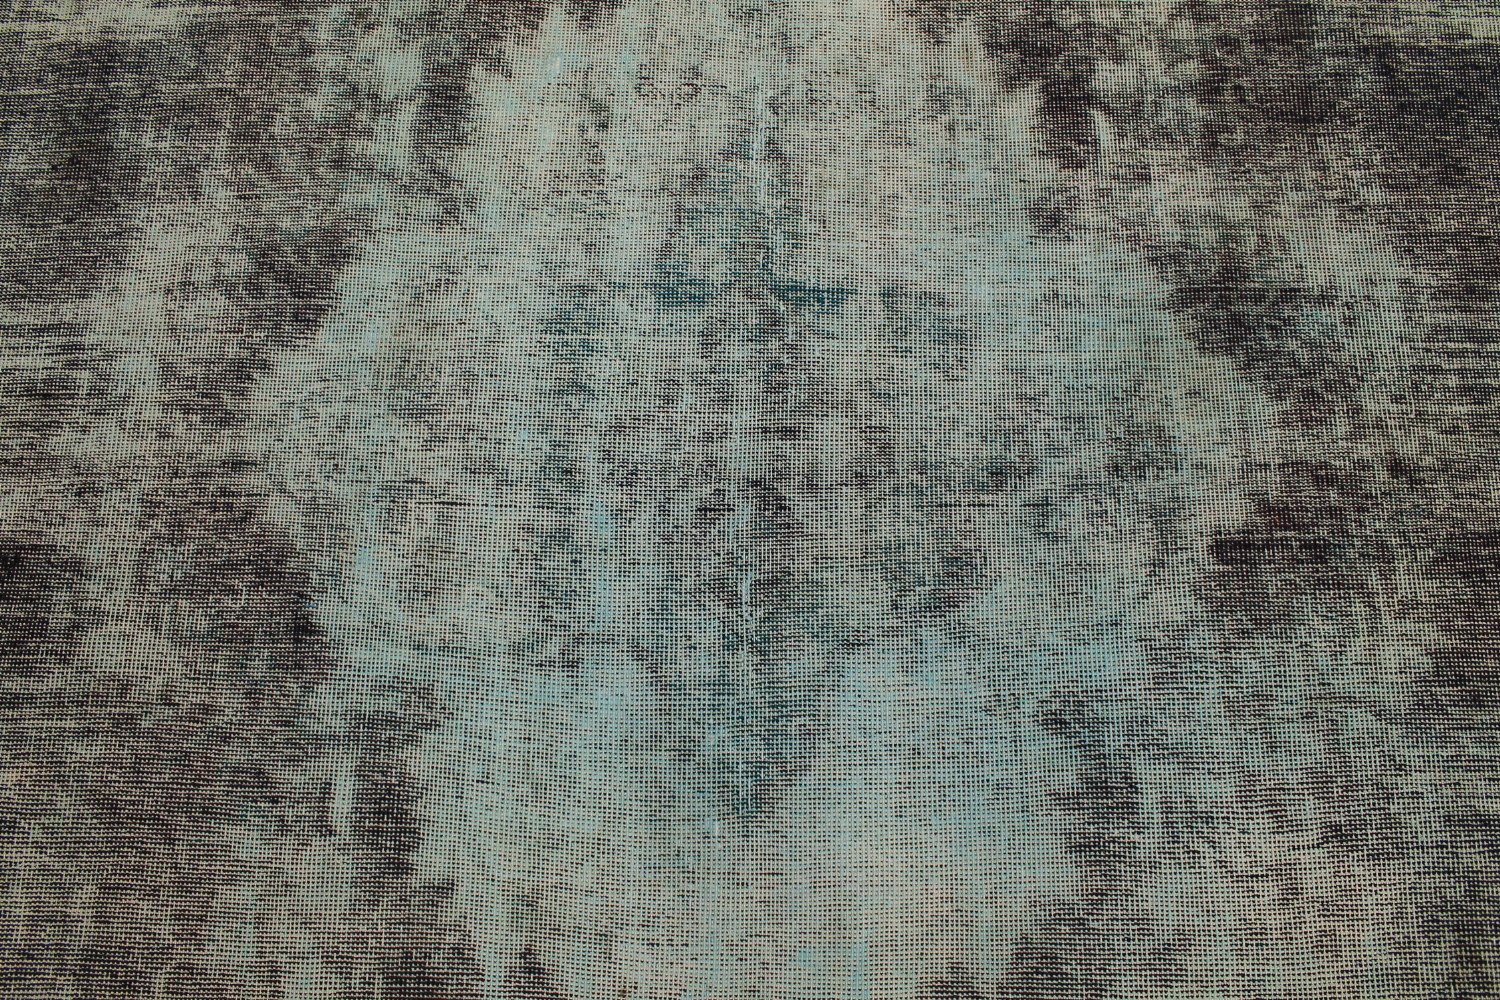 9x12 Vintage Hand Knotted Wool Area Rug - MR17290